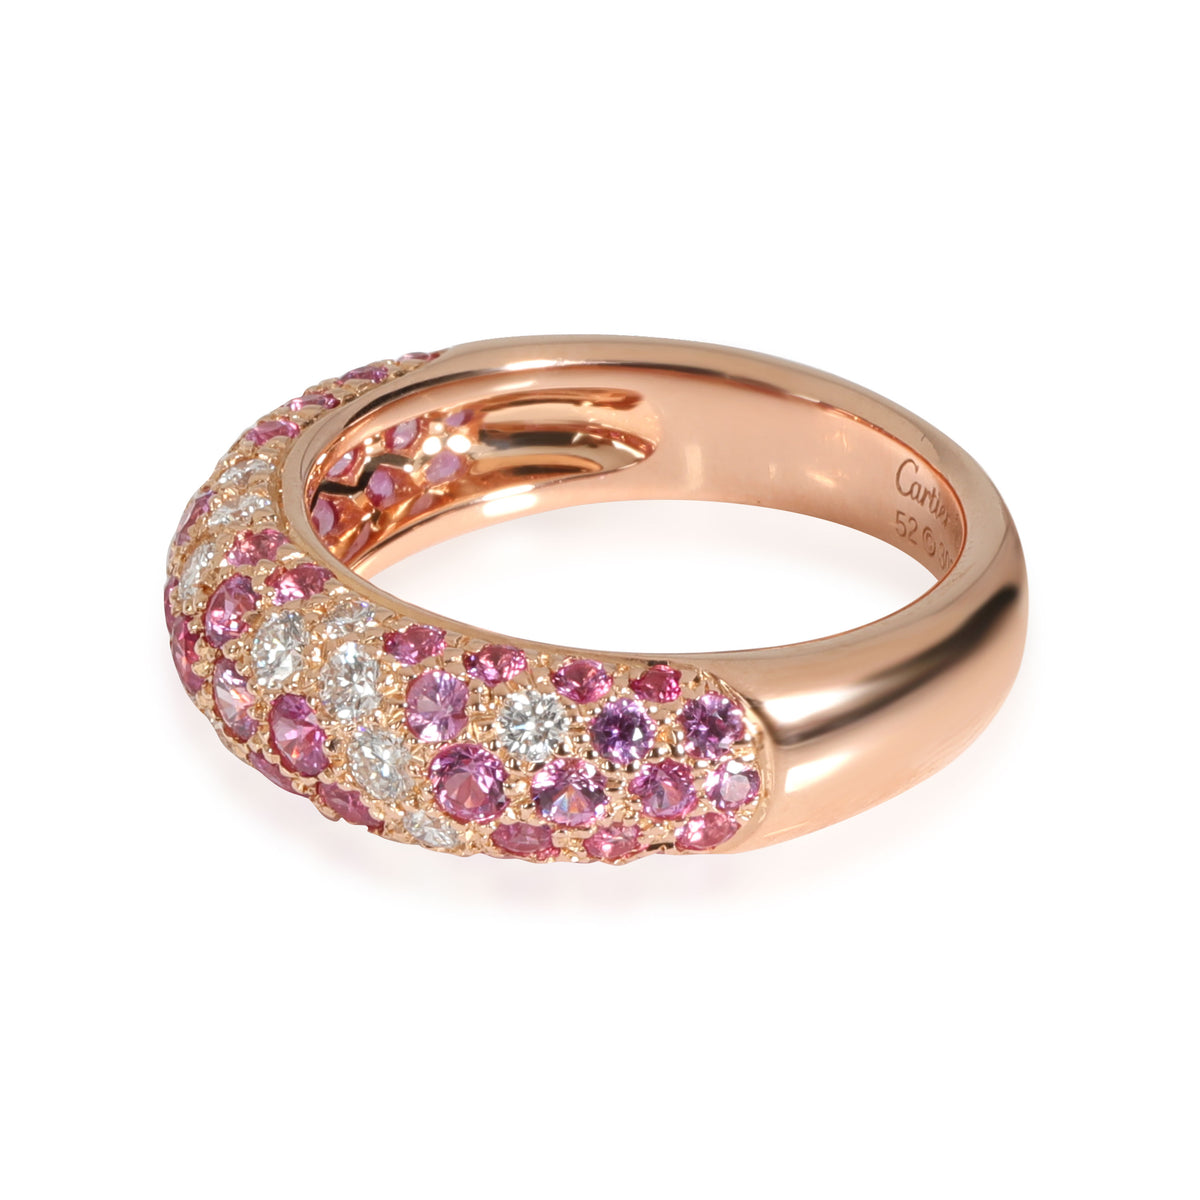 Cartier Etincelle Pink Sapphire & Diamond Ring in 18k Rose Gold Pink 0.36 CTW